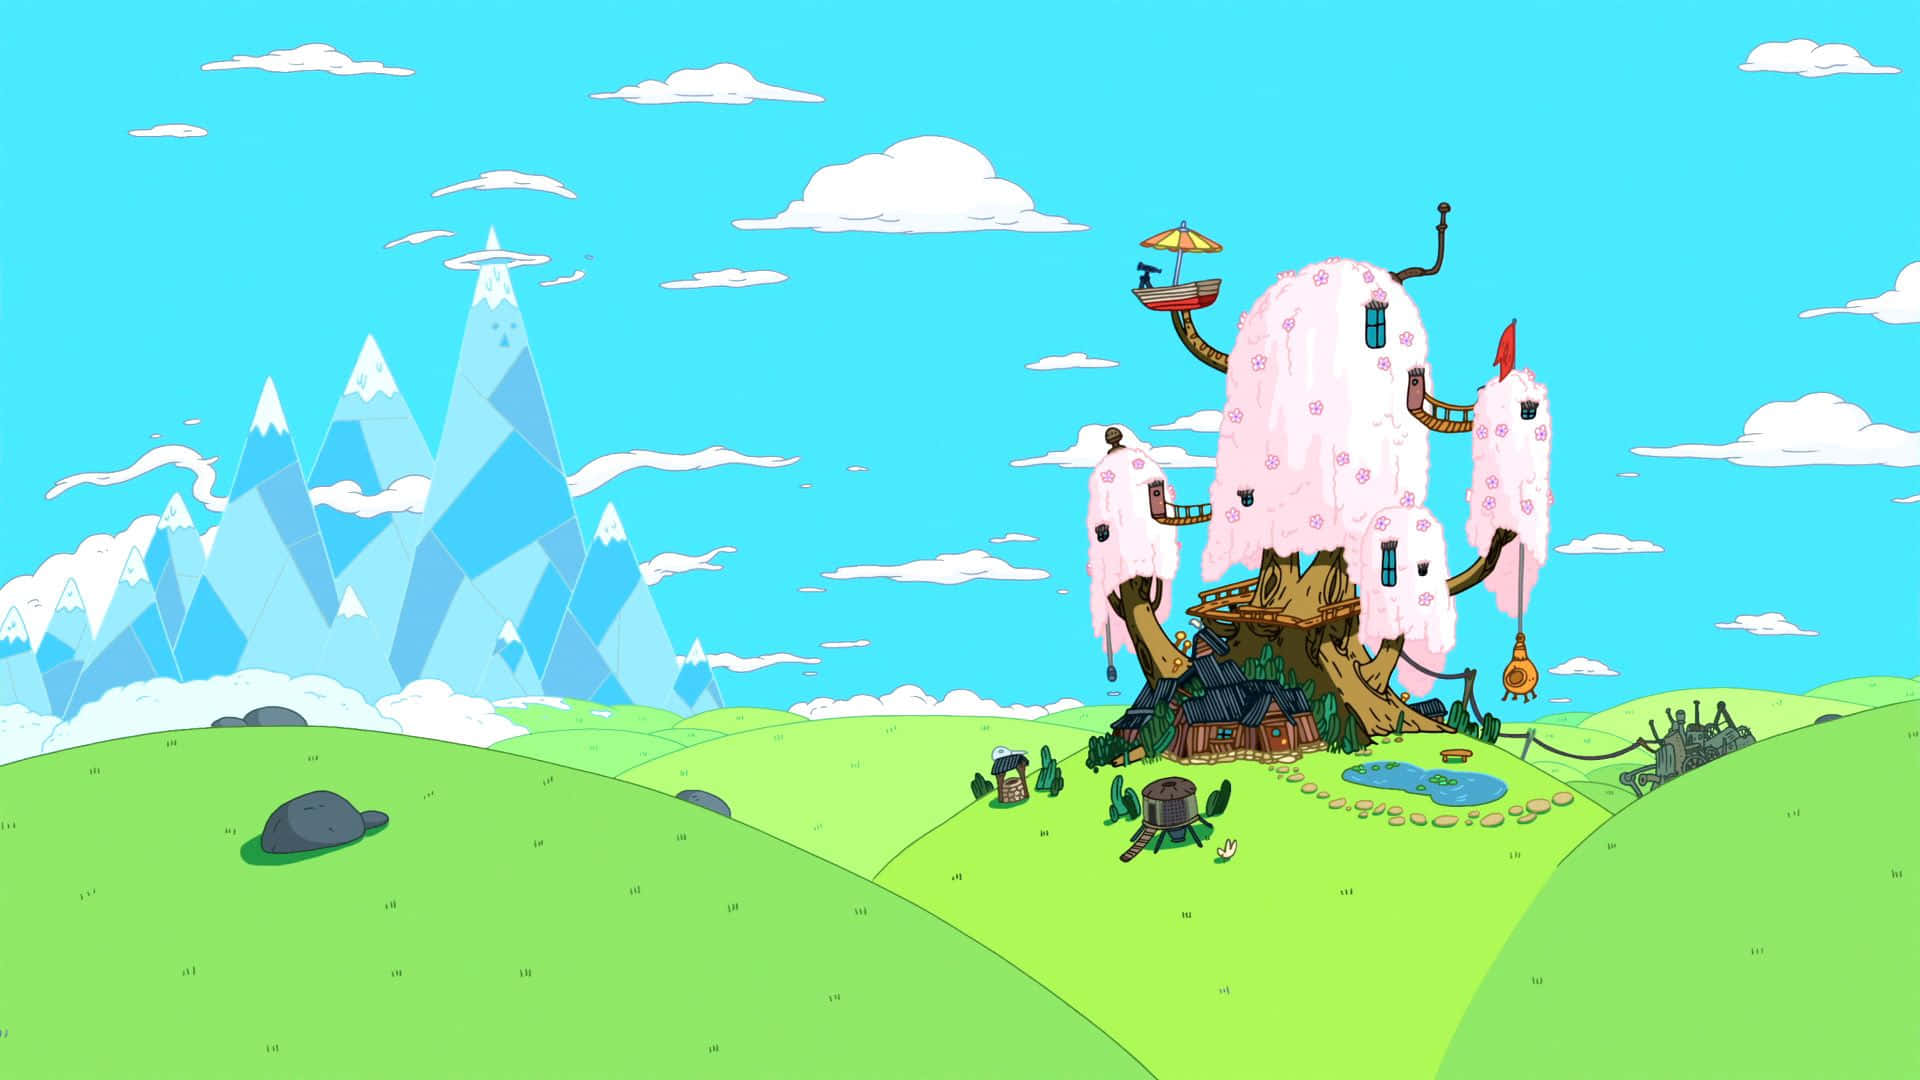 A surreal landscape full of adventure in the world of Adventure Time Wallpaper